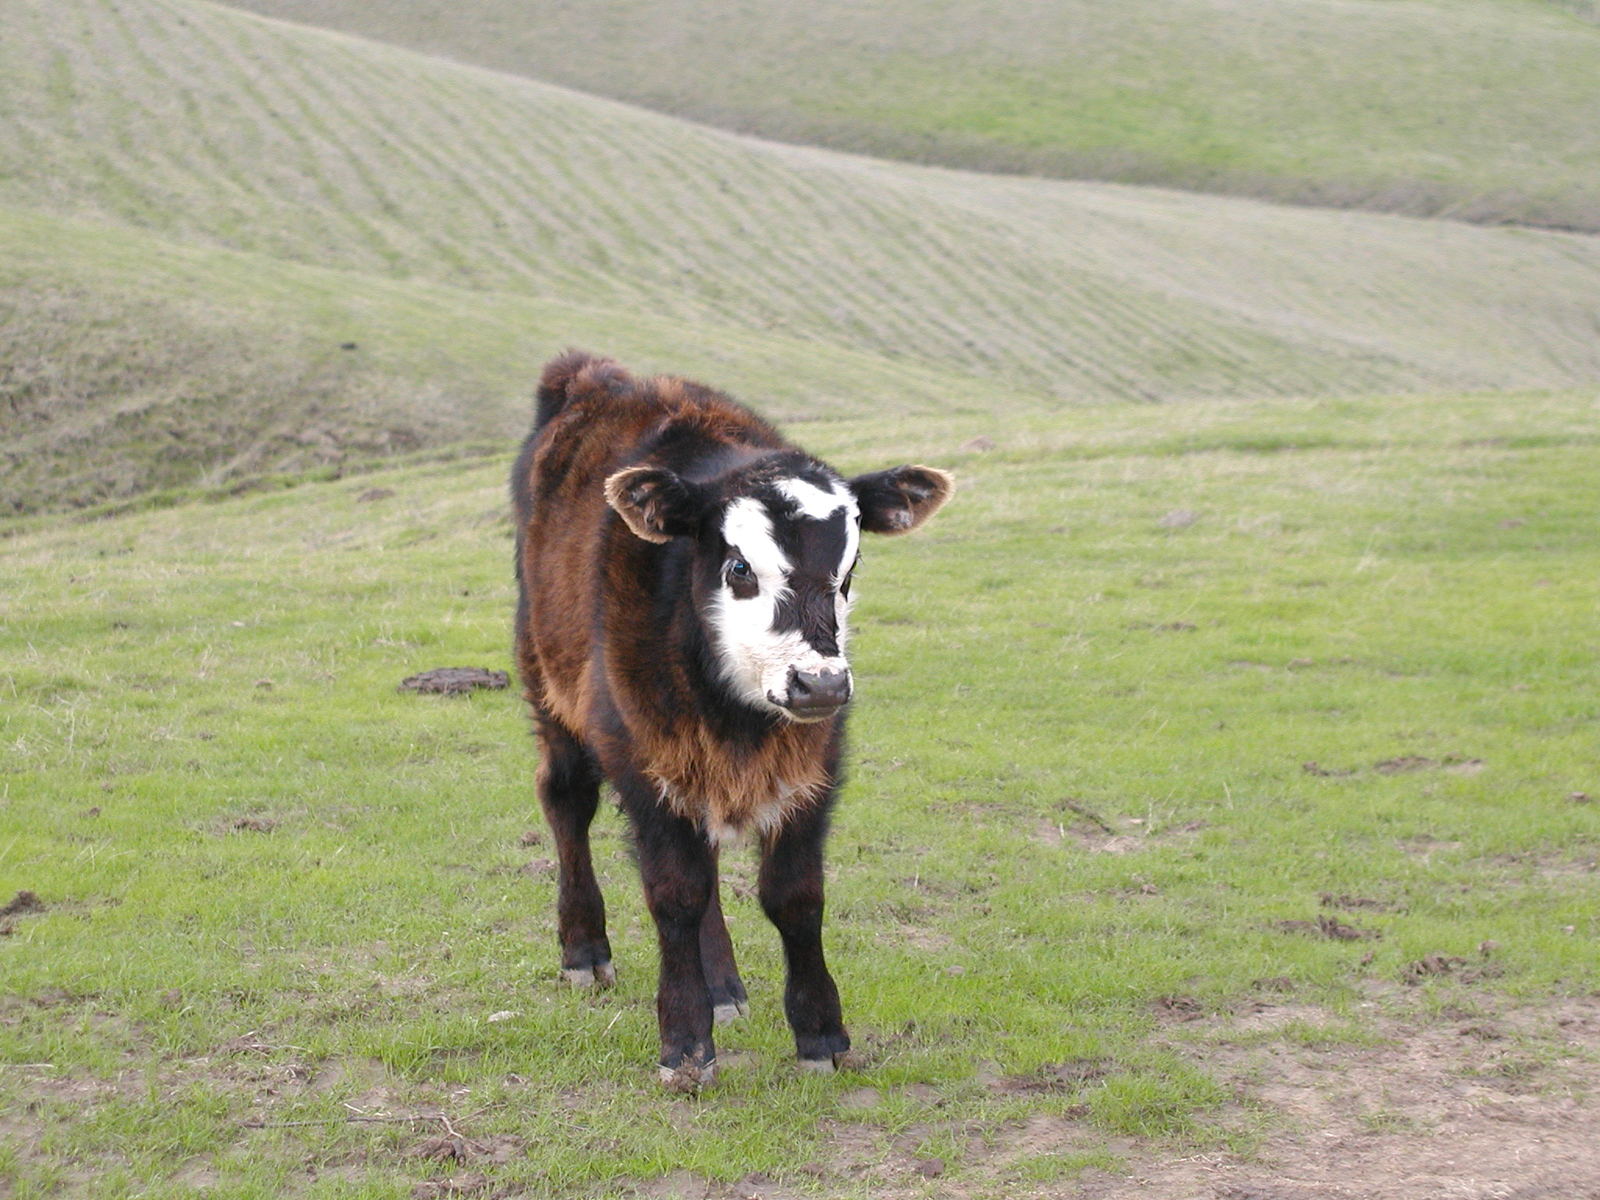 a cow walking through a field in front of some rolling hills